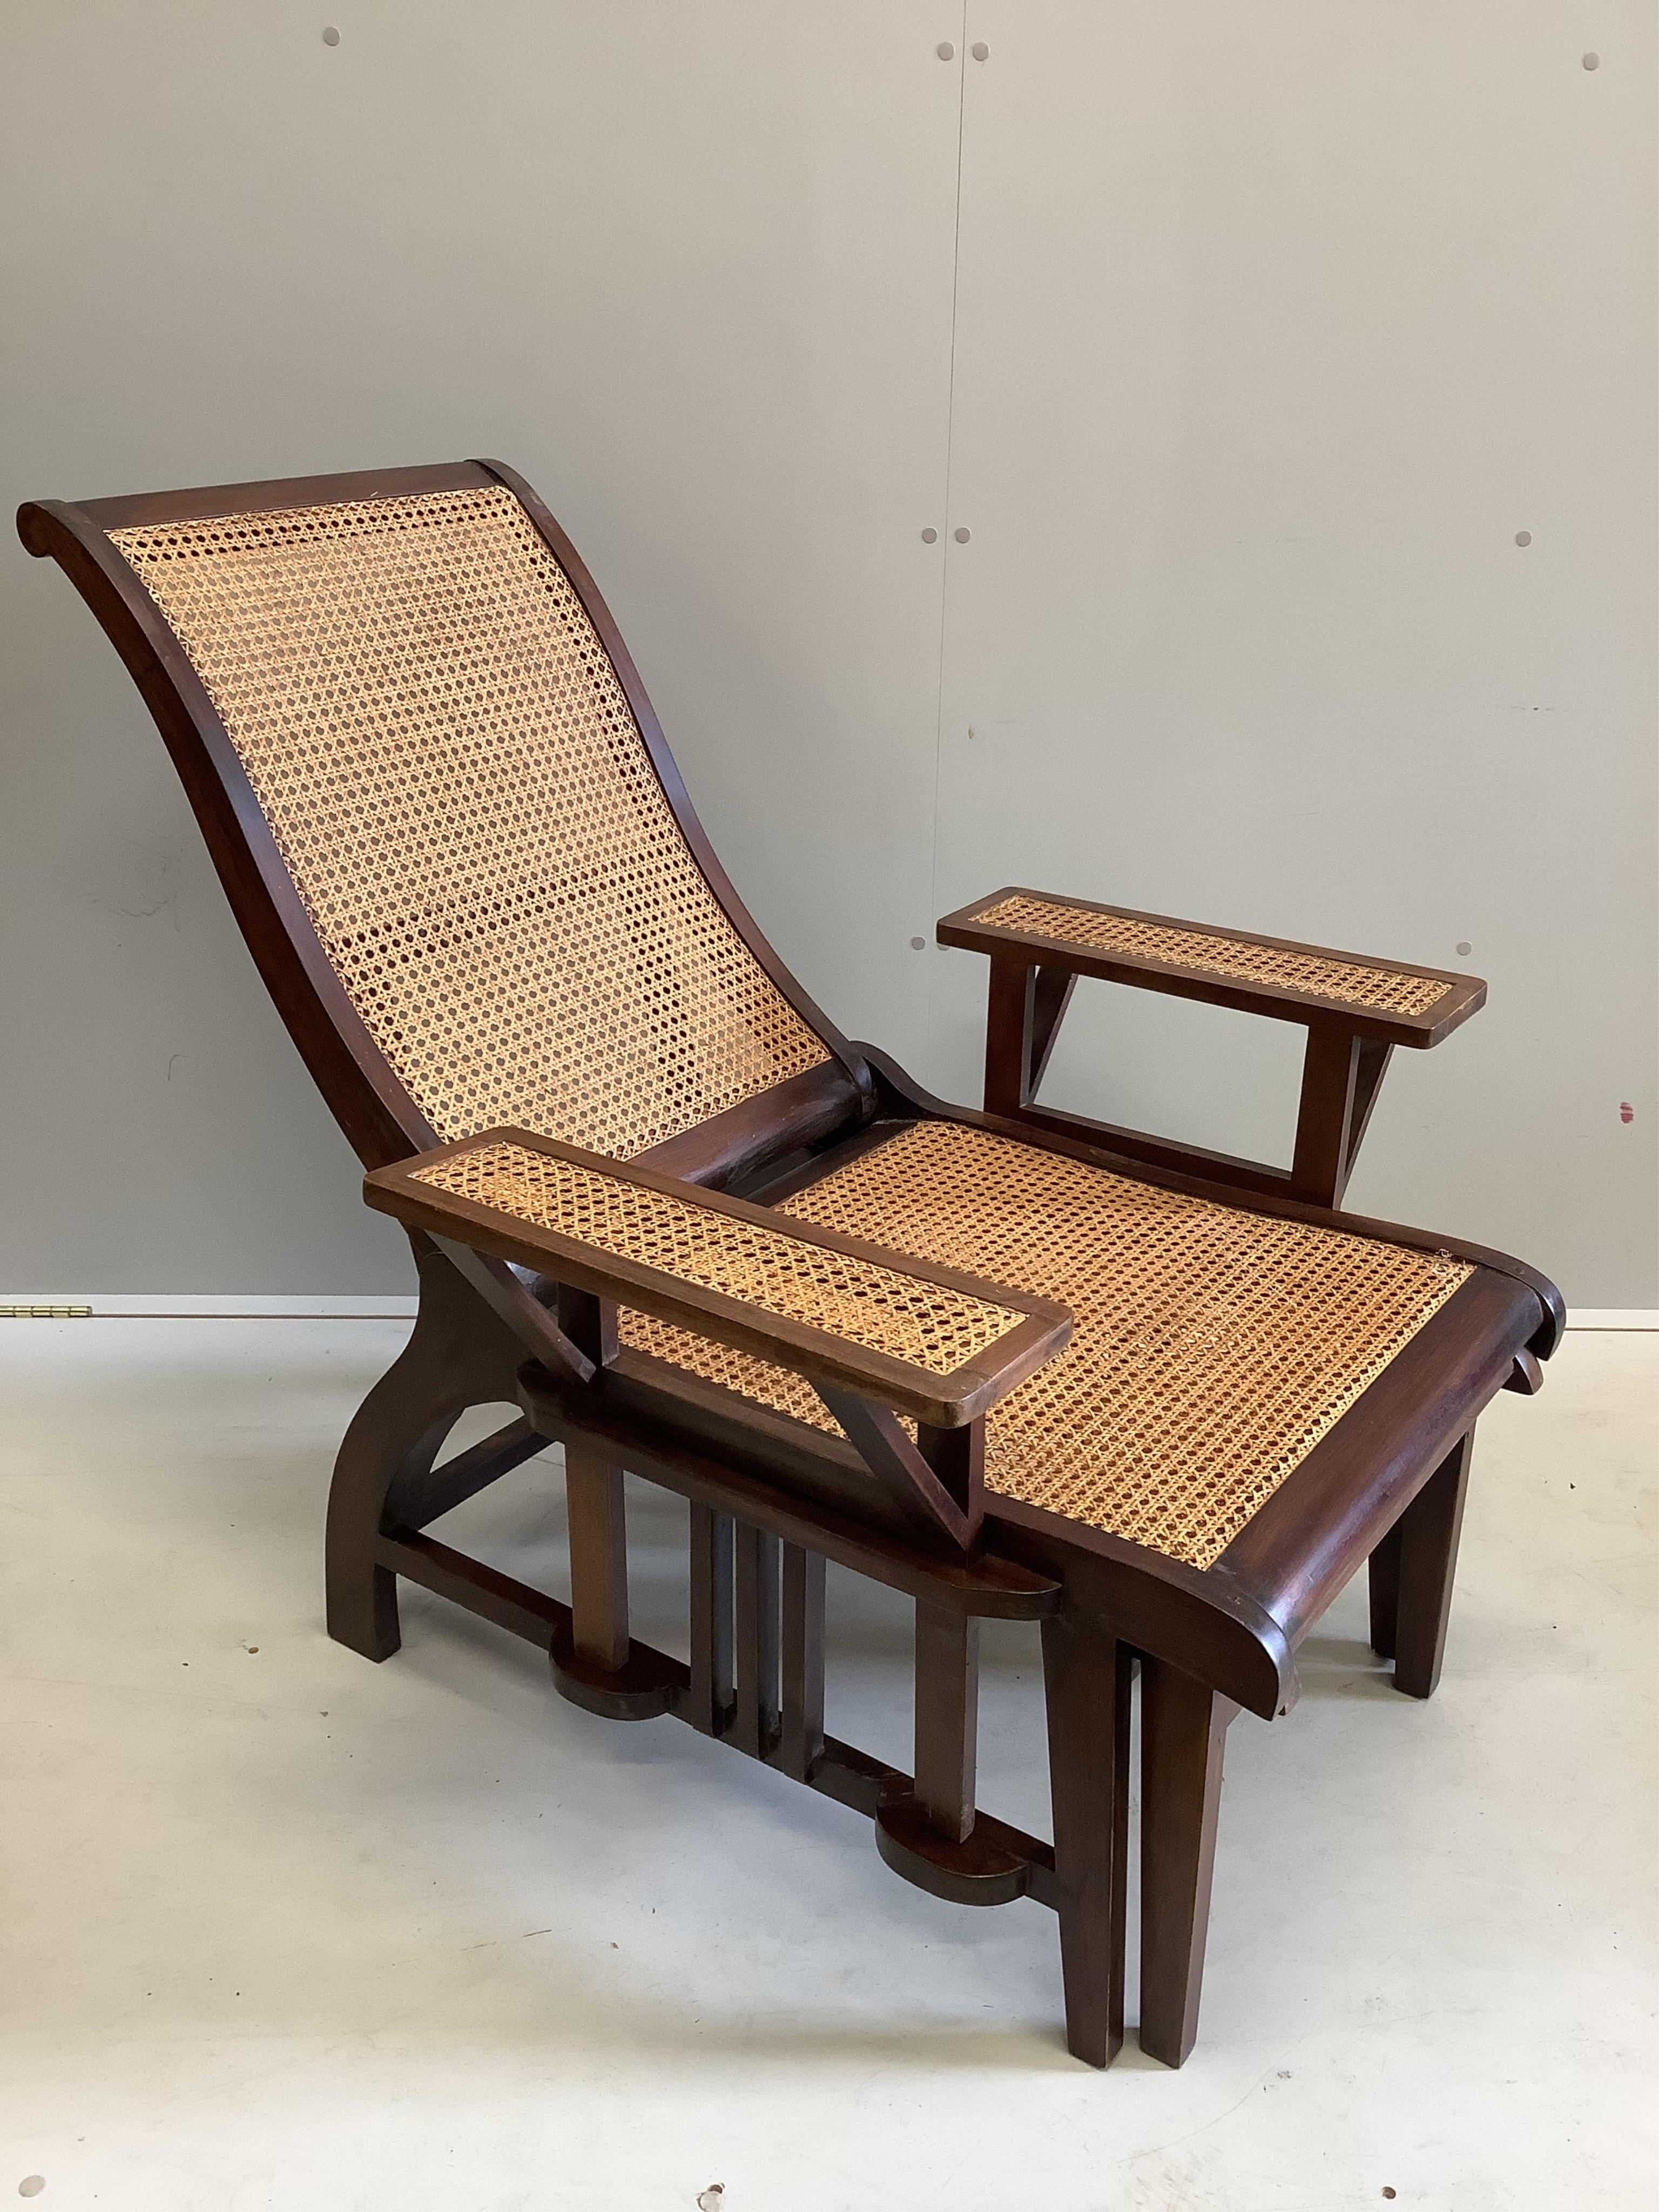 A pair of mid 20th century caned hardwood reclining garden chairs with integral sliding footrests and detachable armrests, width 85cm, depth 90cm, height 106cm. Condition - good